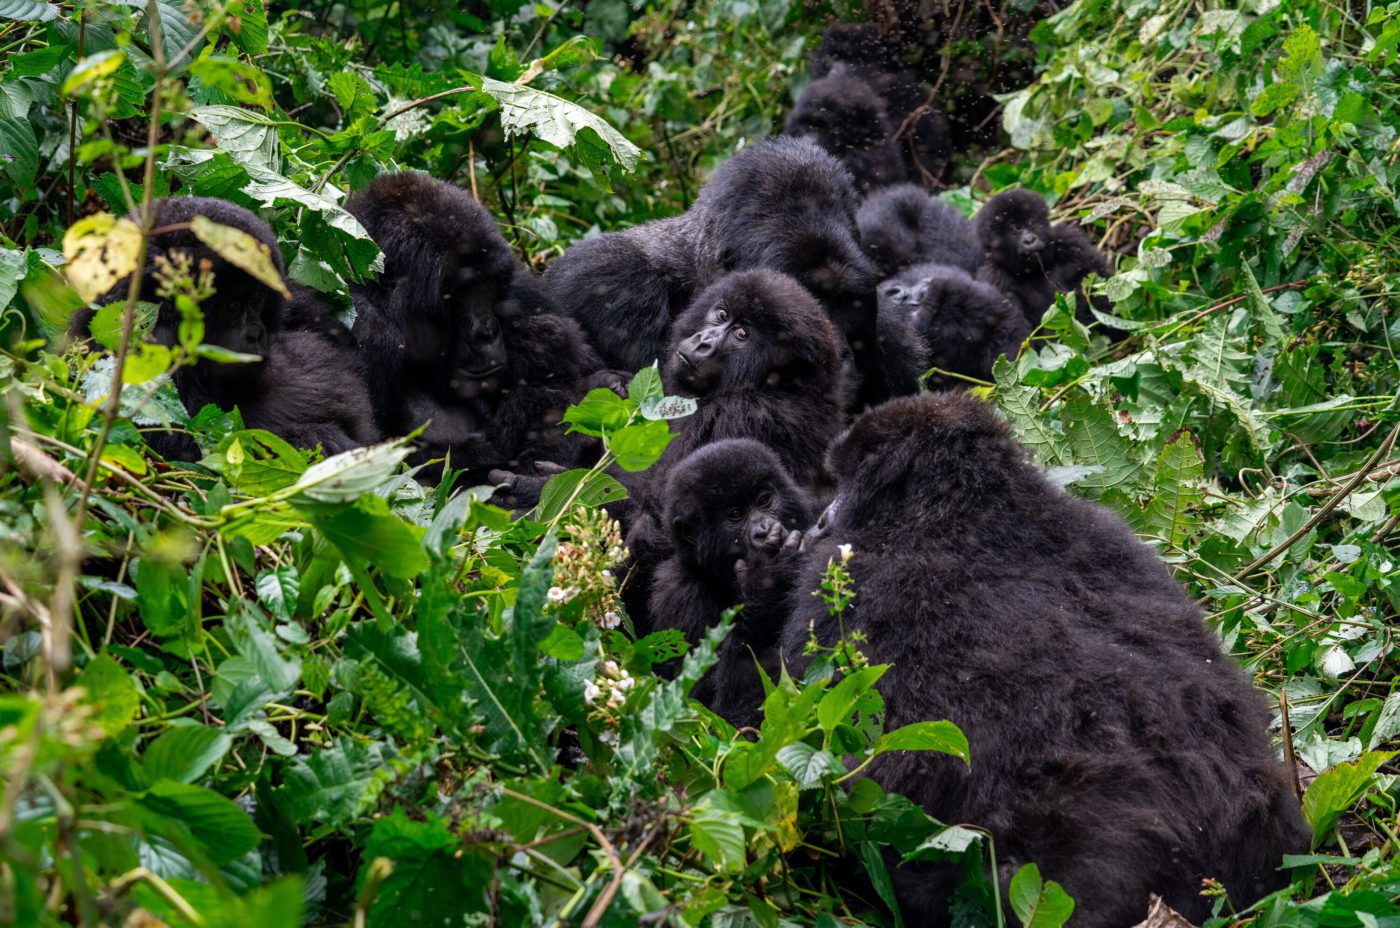 A family of mountain gorillas resting in the rainforest